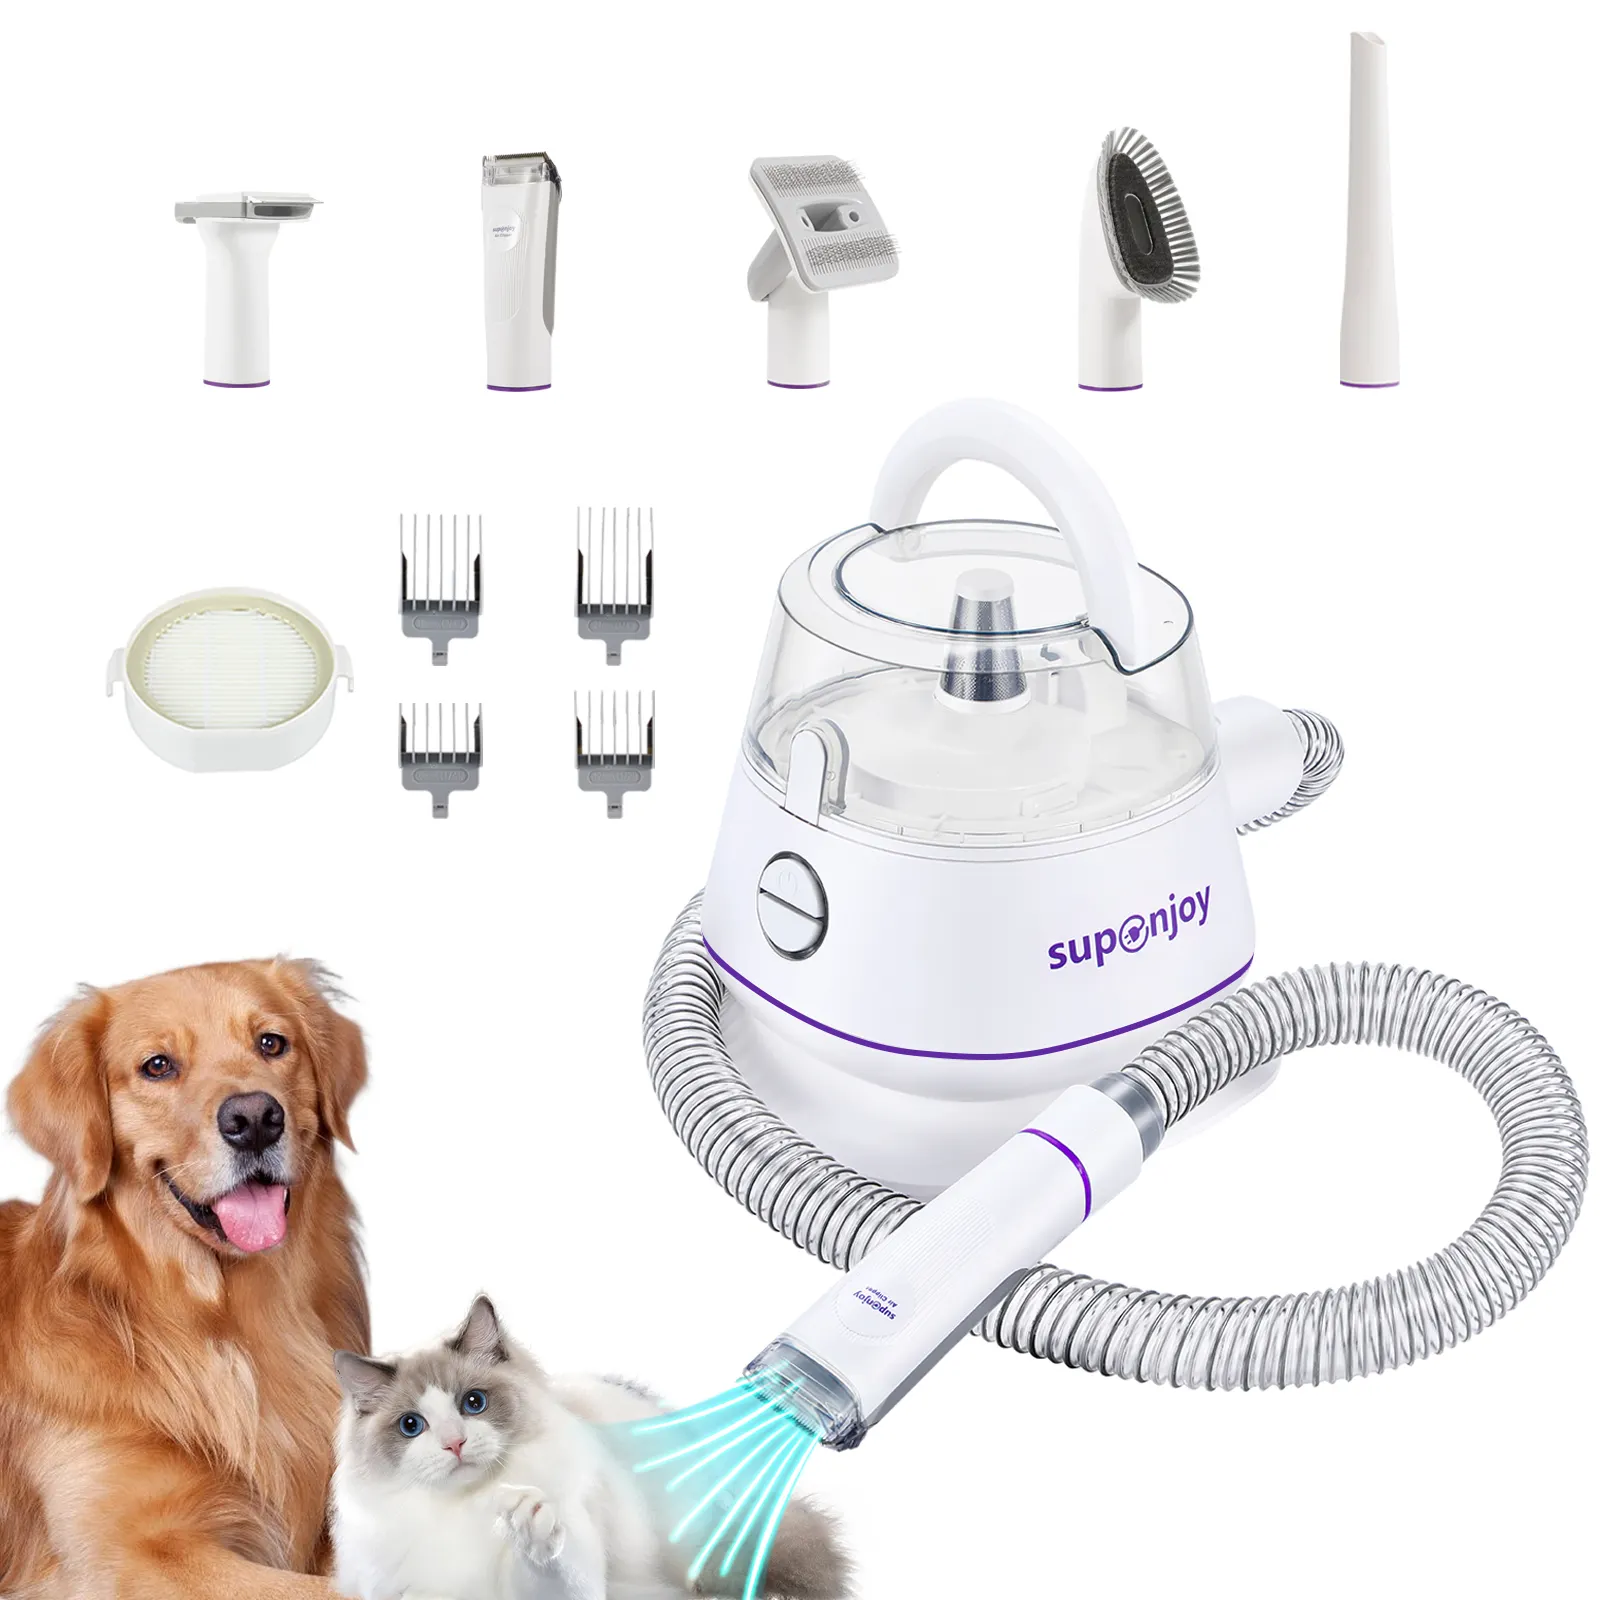 pet cat clipper shedding brush grooming kit and vacuum pet grooming products 99% hair removal